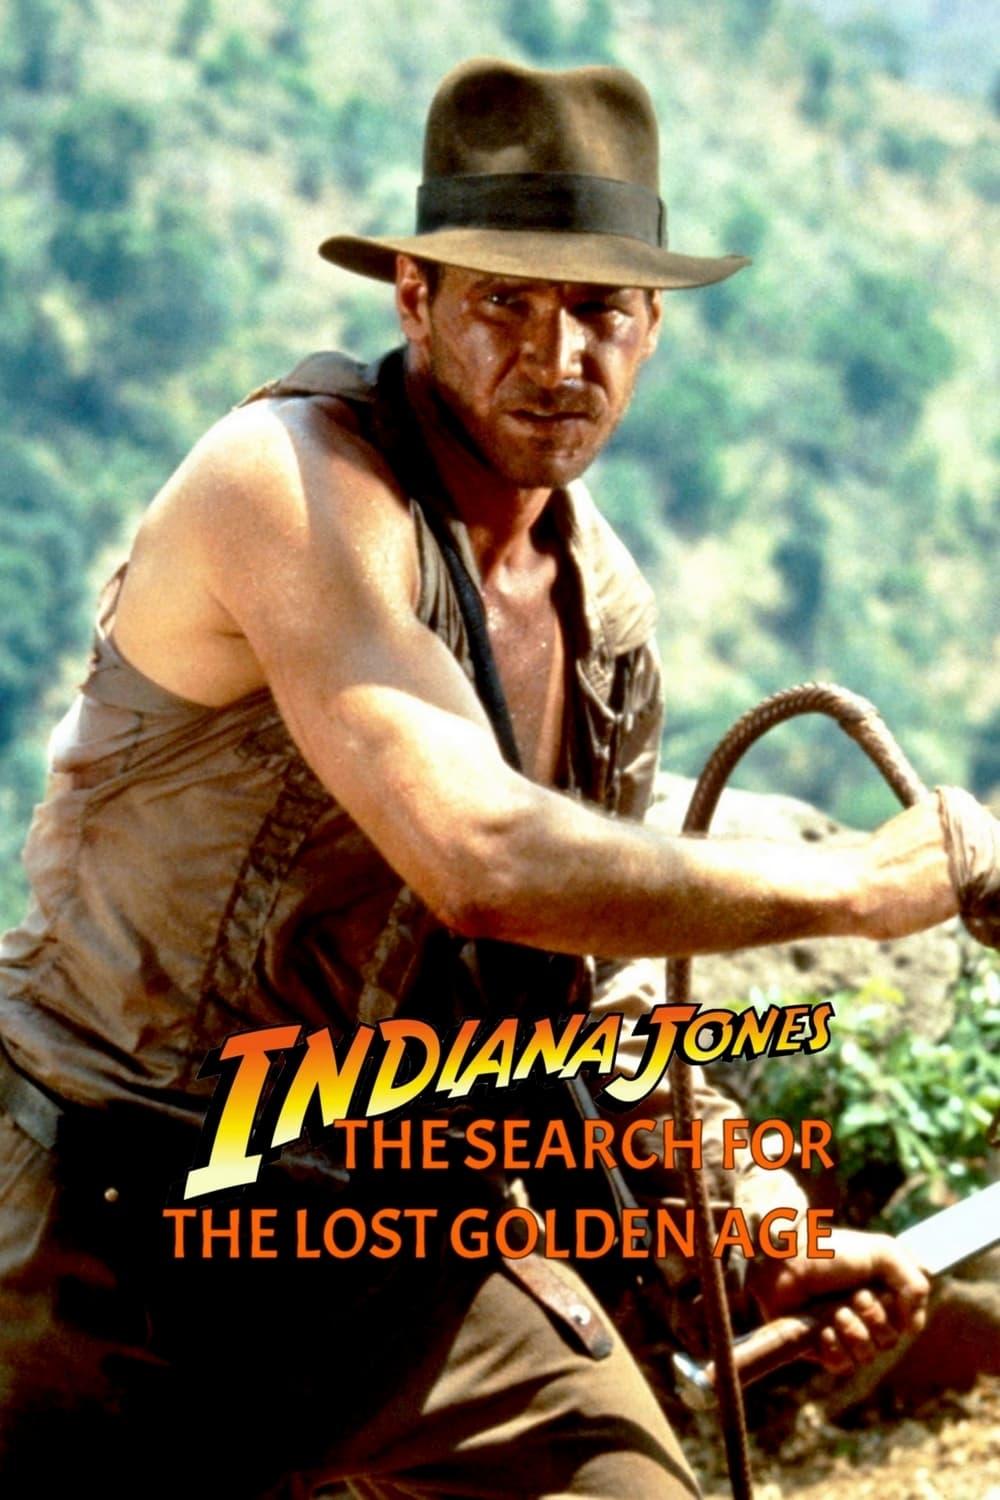 Indiana Jones: The Search for the Lost Golden Age poster